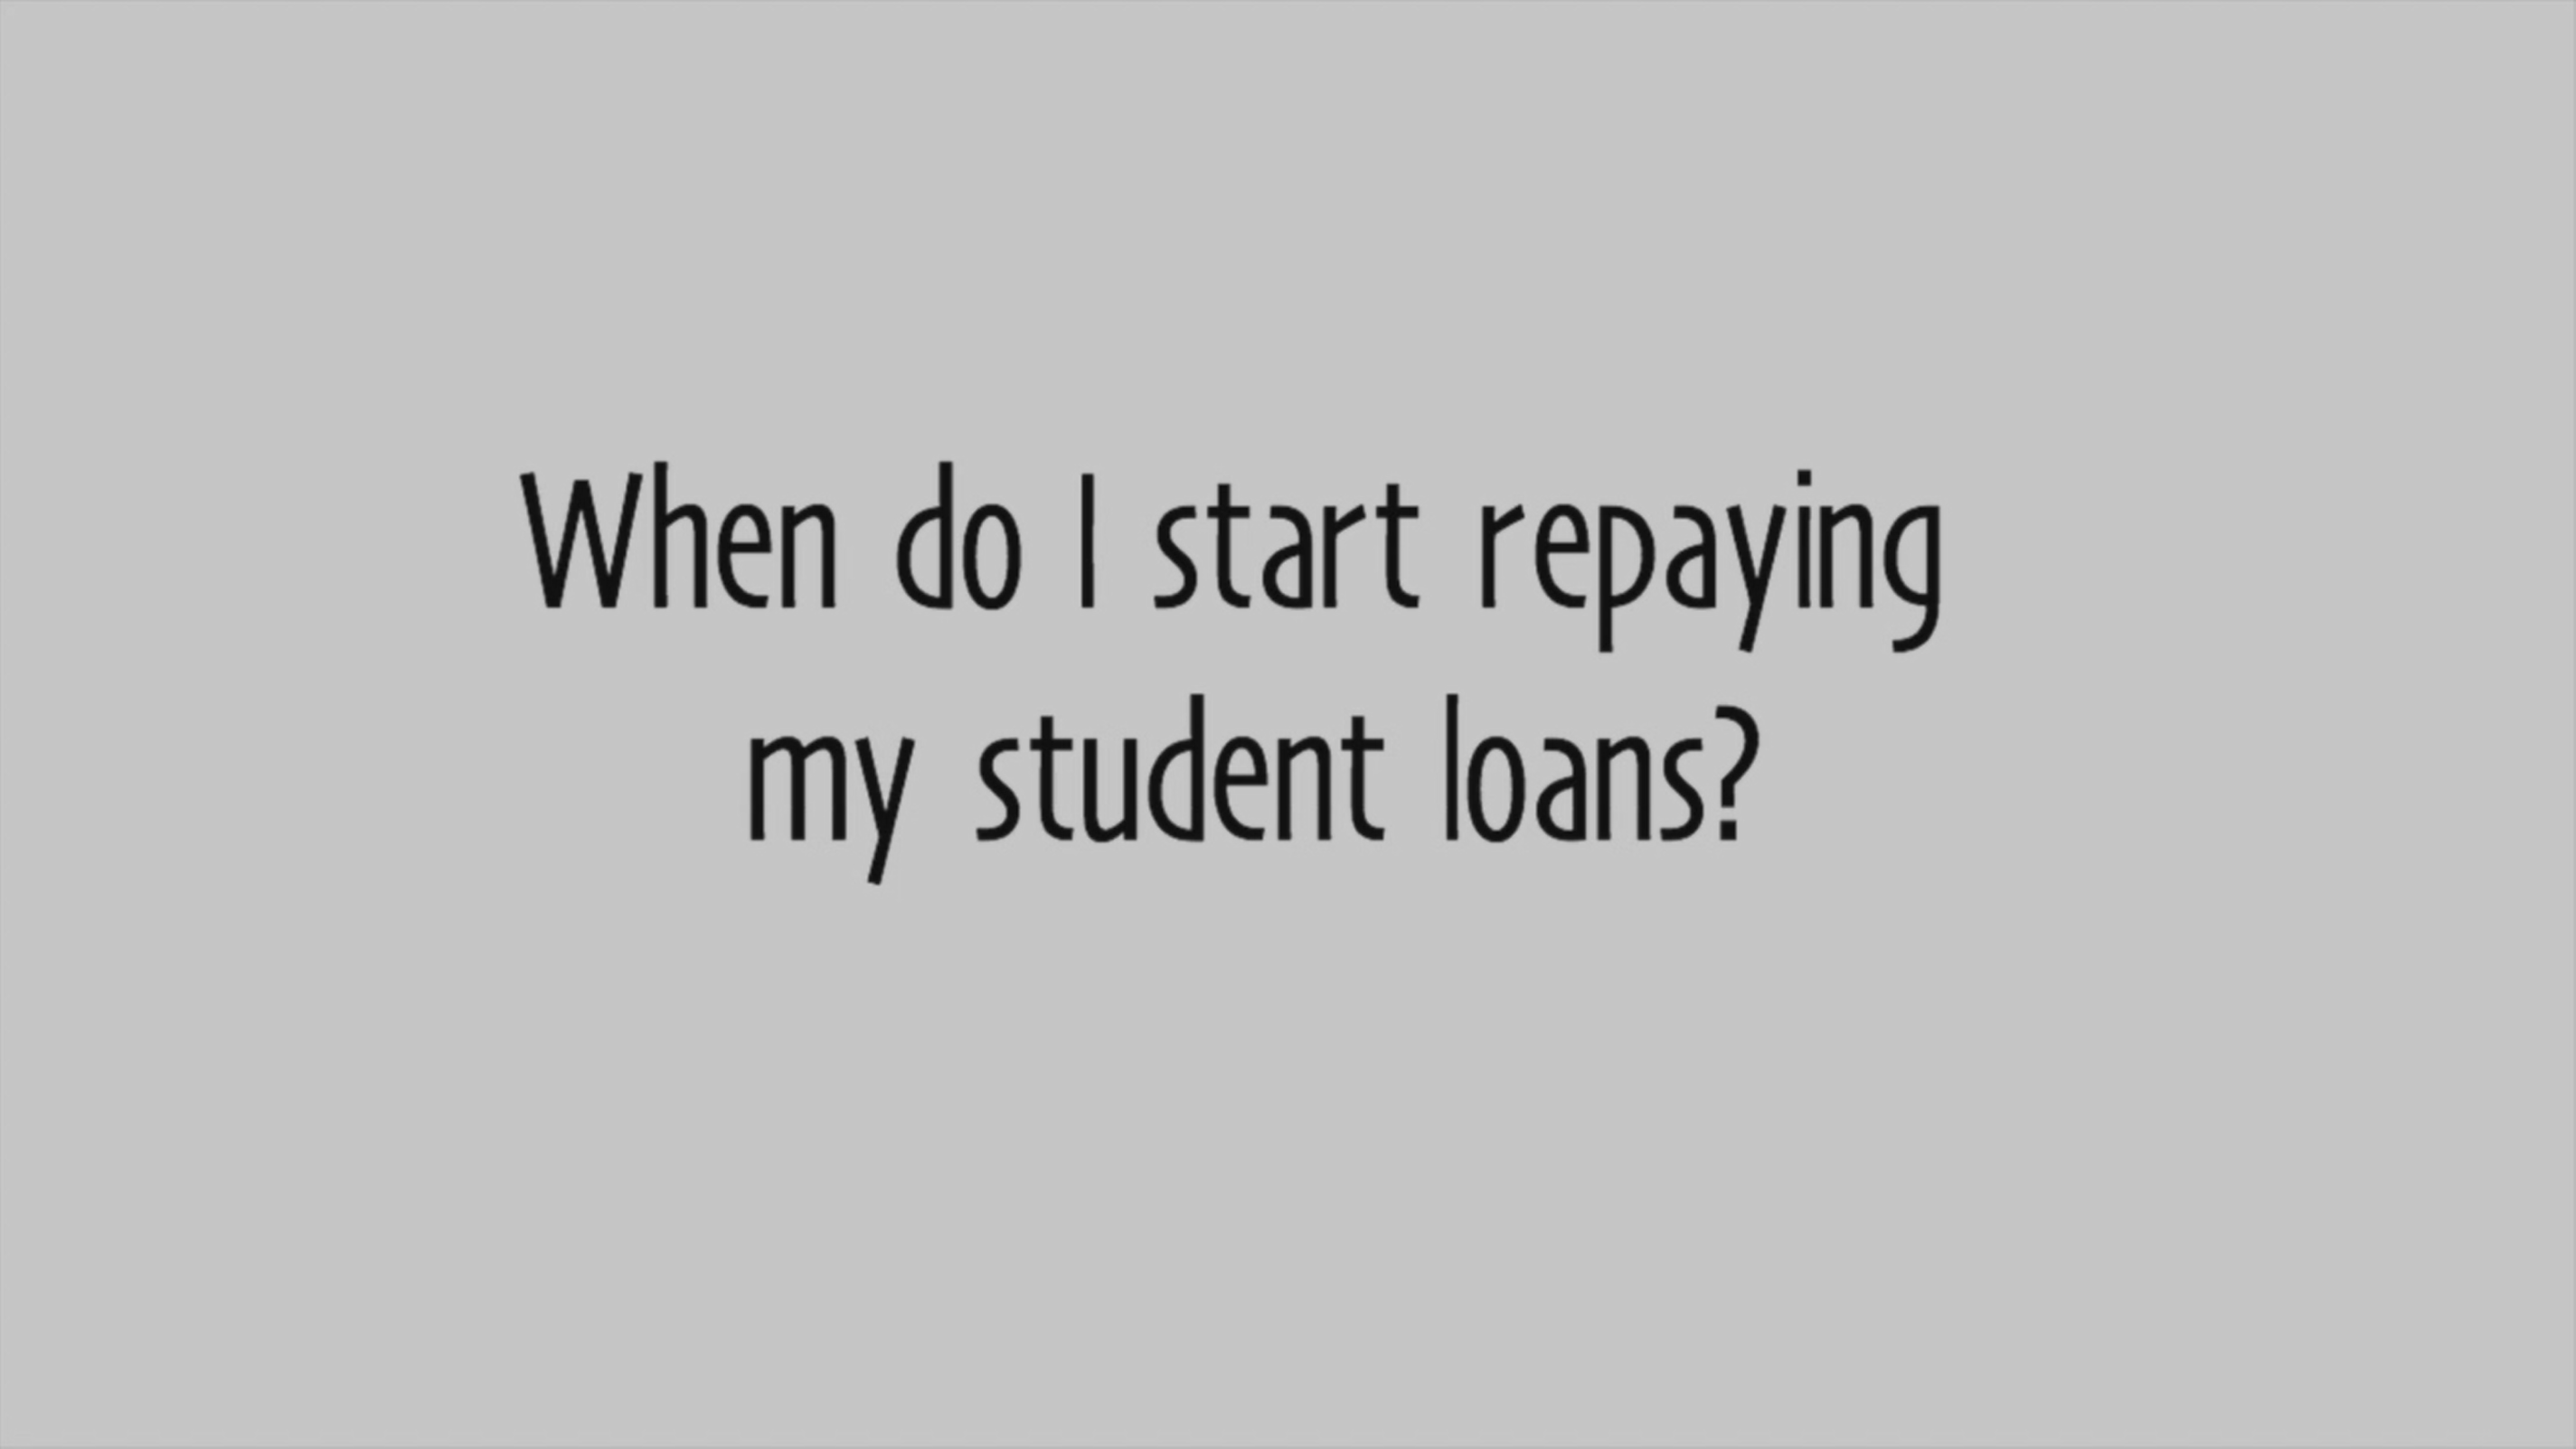 Play 'When do I start repaying my student loans?'